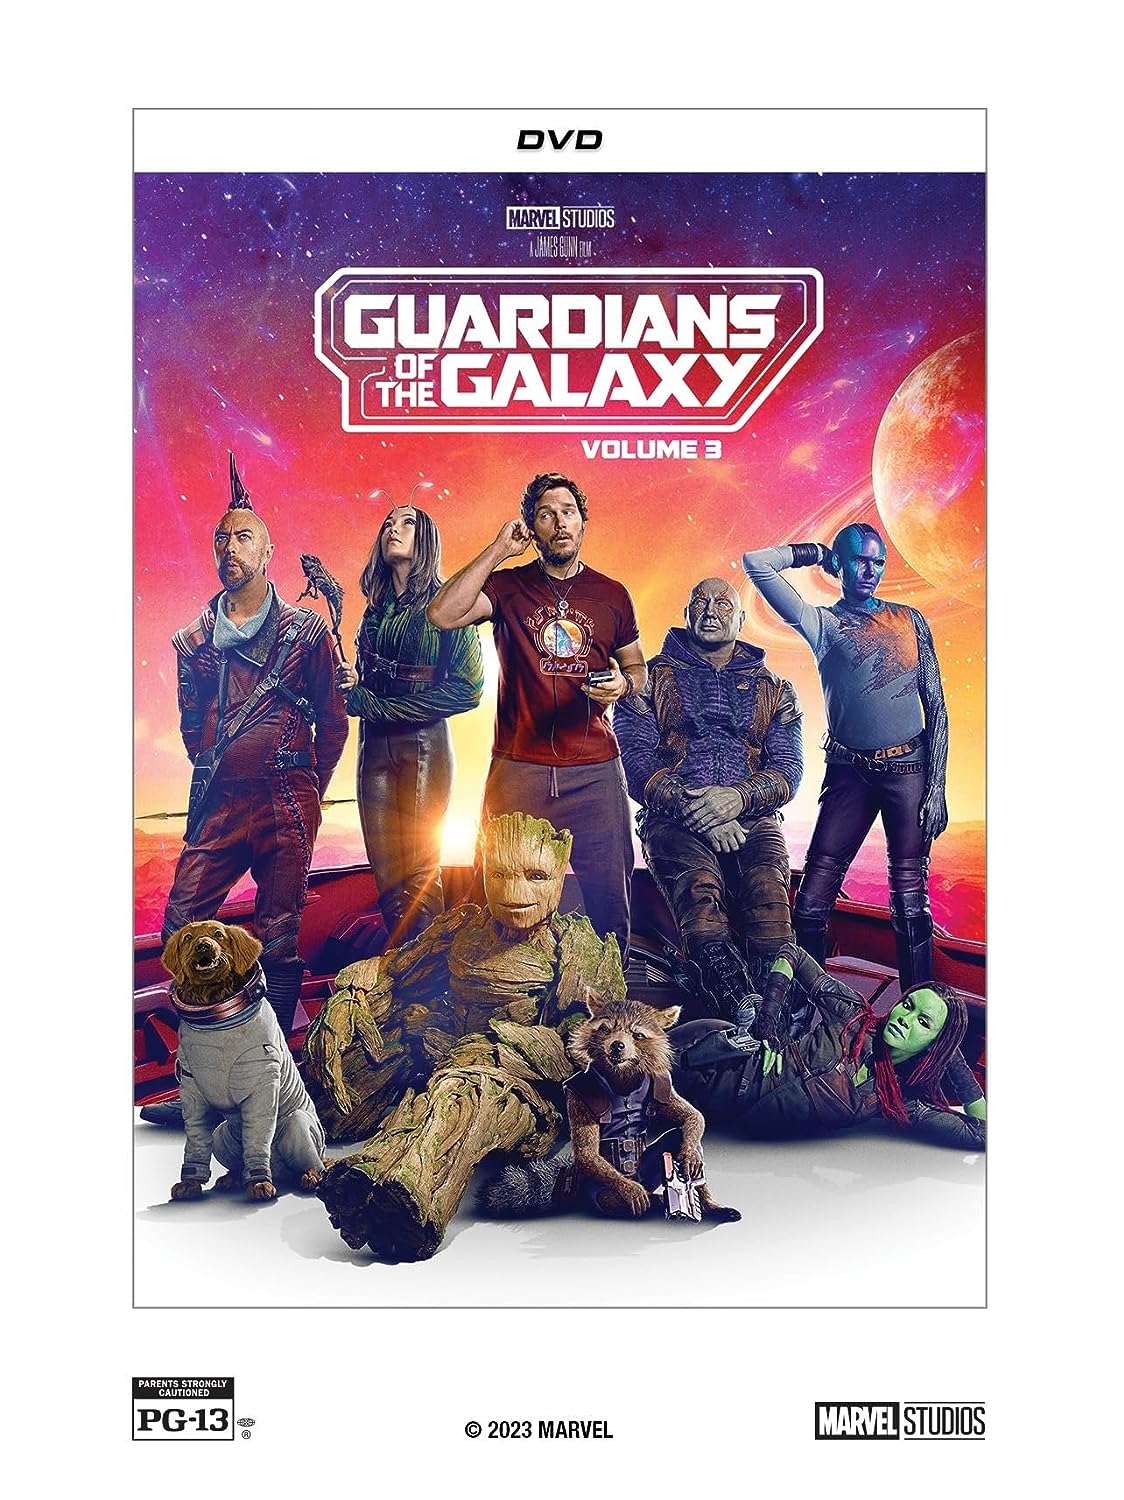 Image for "Guardians of the Galaxy Vol 3"